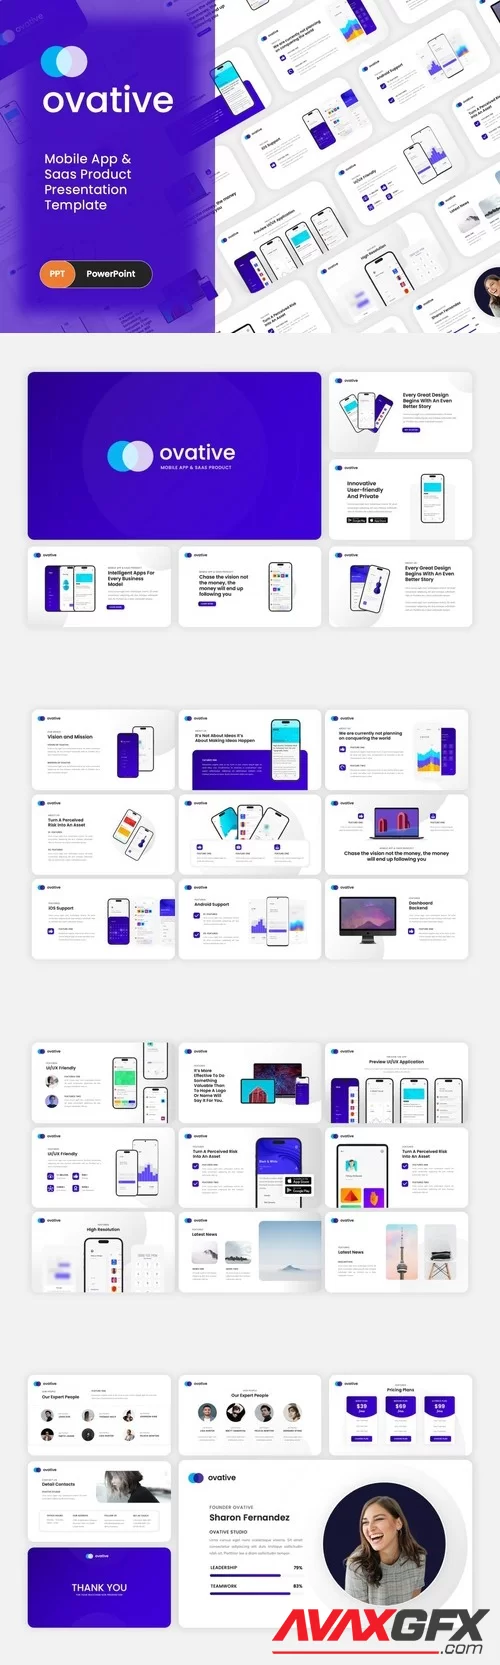 Ovative - Mobile Apps & SAAS PowerPoint Template PPTX